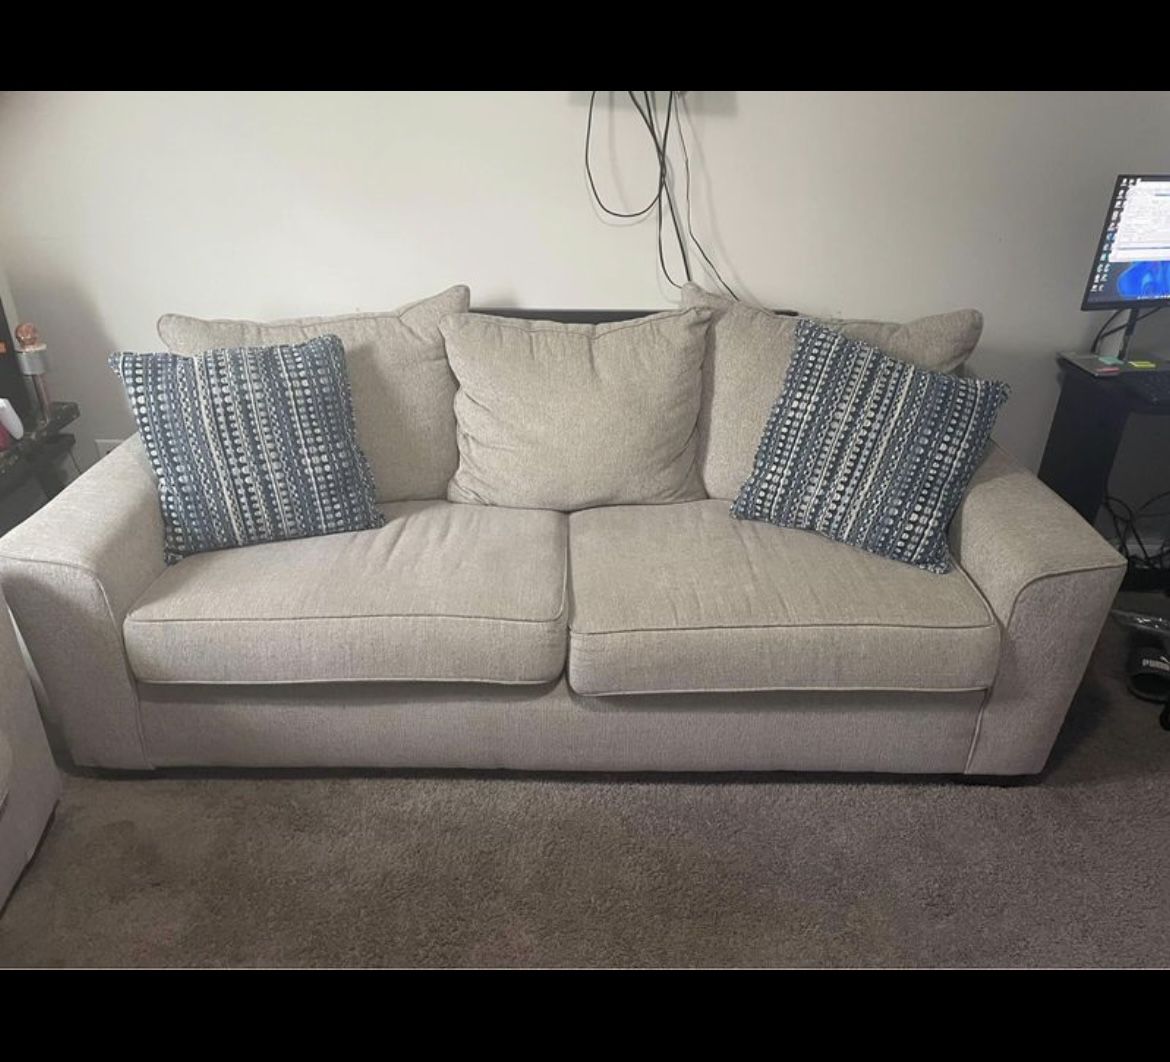 Gently Used- Sofa and Love Seat